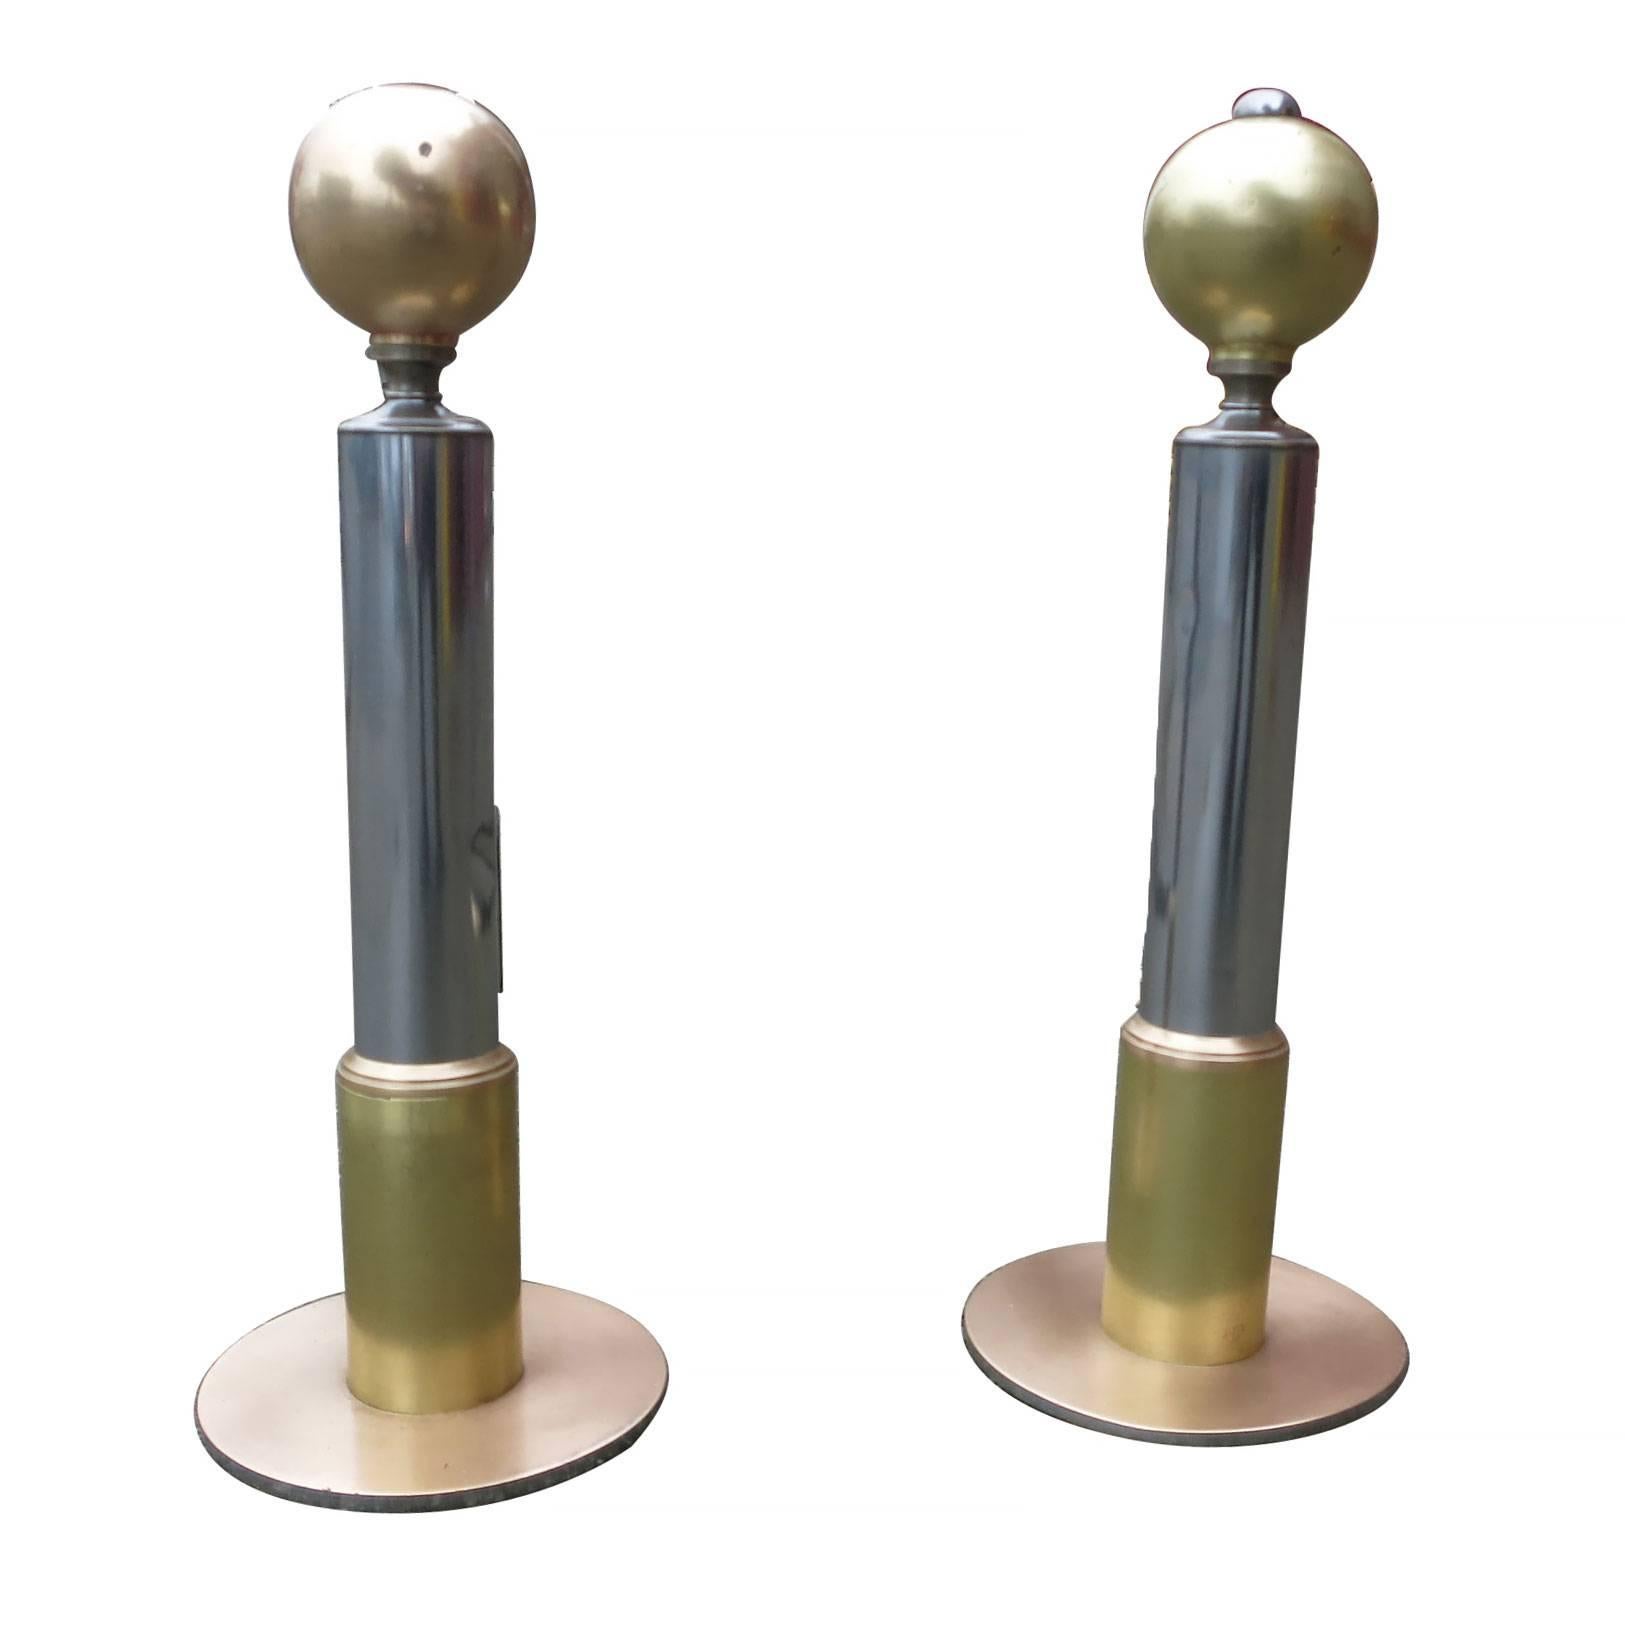 This American Art Deco chrome and brass andirons set that has been restored to original shine. The andirons feature a 5